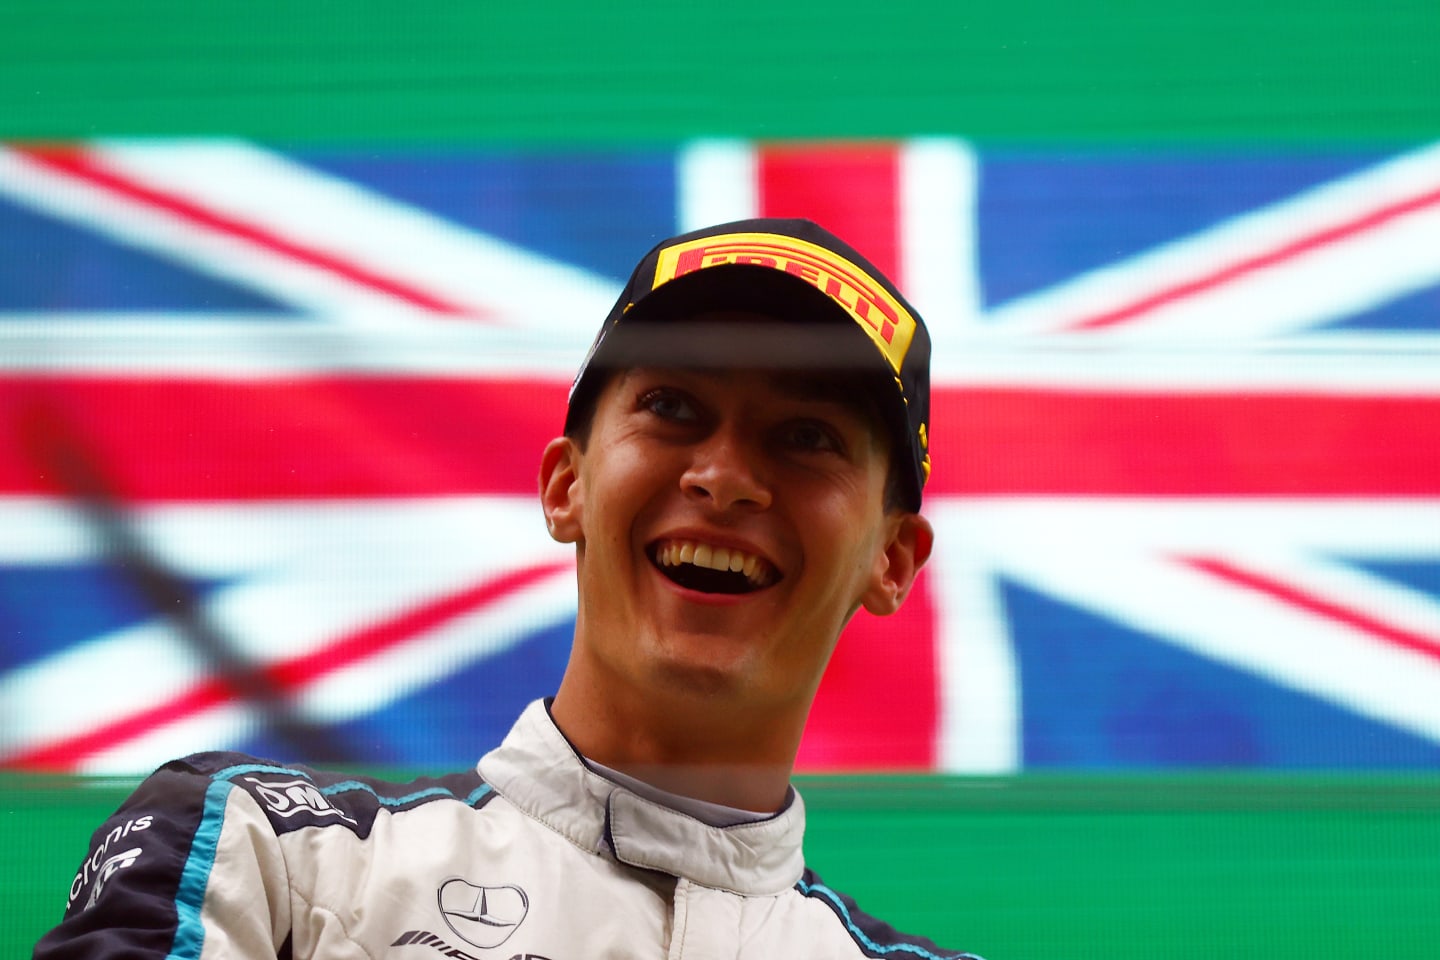 SPA, BELGIUM - AUGUST 29: Second placed George Russell of Great Britain and Williams celebrates on the podium during the F1 Grand Prix of Belgium at Circuit de Spa-Francorchamps on August 29, 2021 in Spa, Belgium. (Photo by Dan Istitene - Formula 1/Formula 1 via Getty Images)